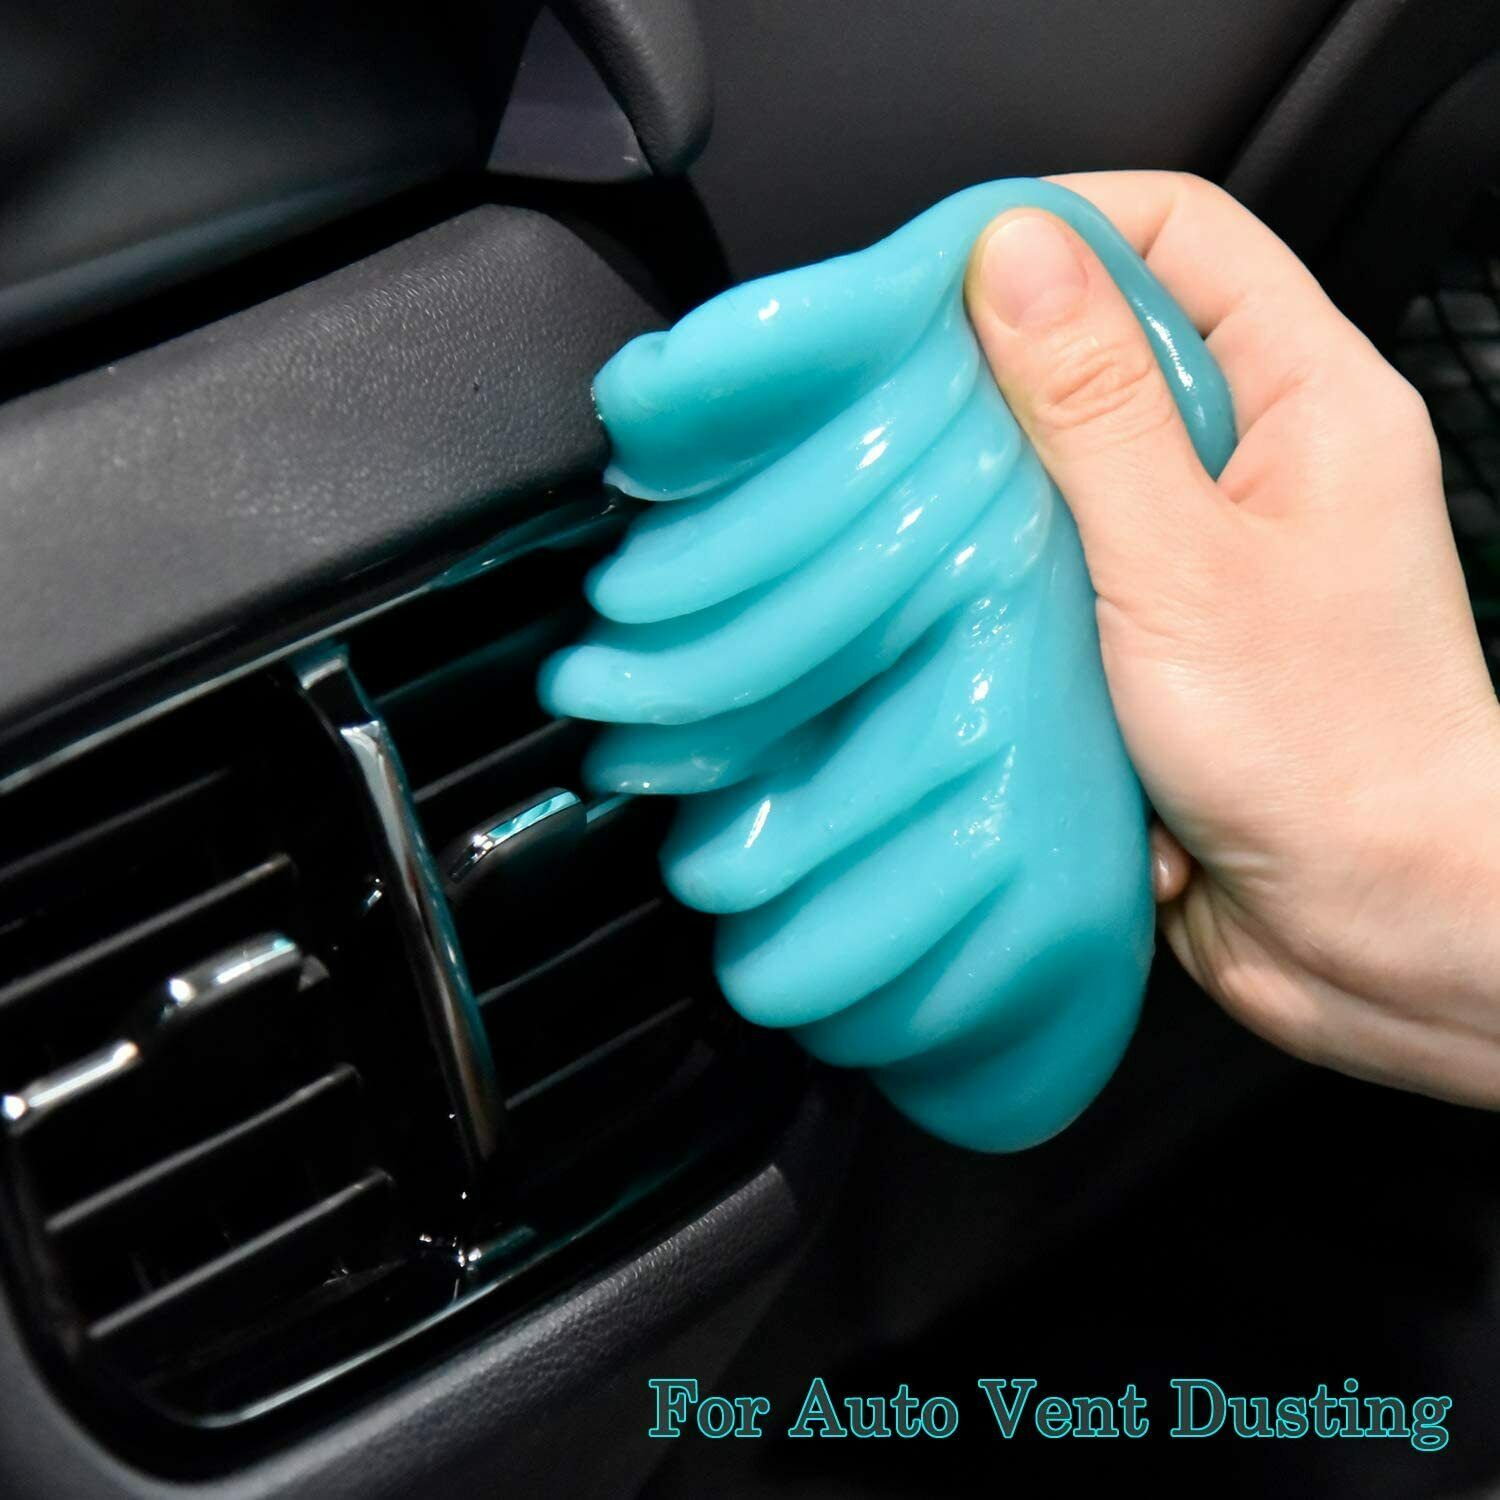 Cleaning Slime – Bristol Car Cleaning